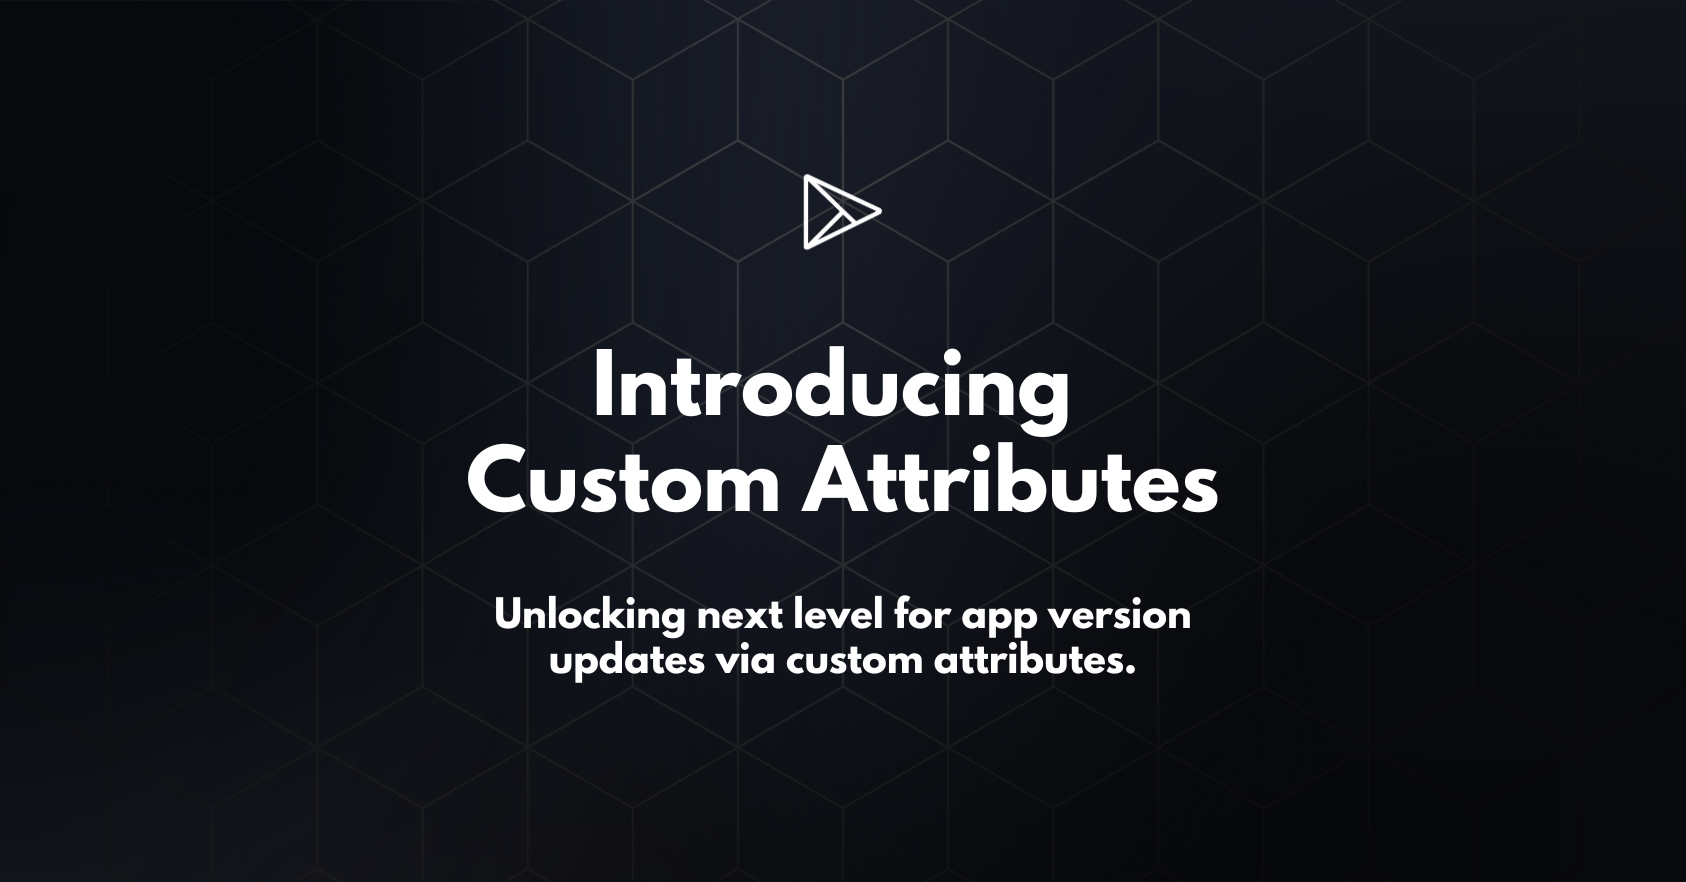 Introducing Custom Attributes - Unlocking new use-cases and possibilites